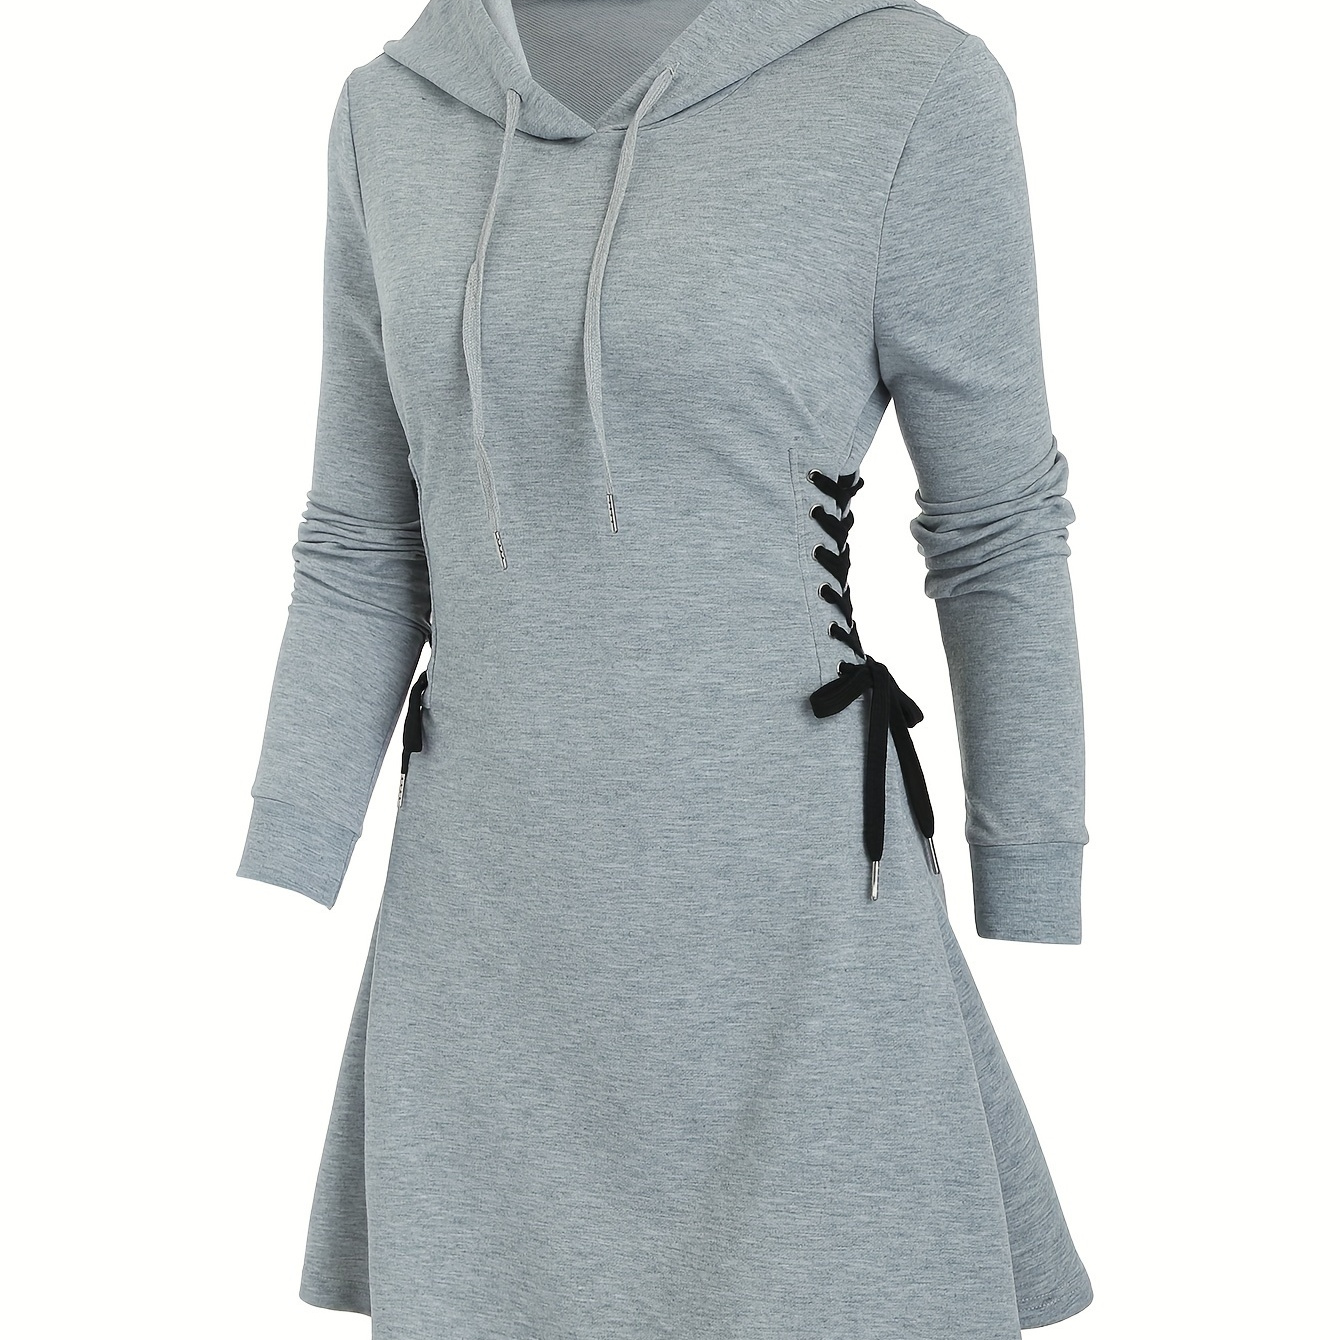 

Solid Side Drawstring Hooded Dress, Casual Cinched Waist Long Sleeve Dress, Women's Clothing